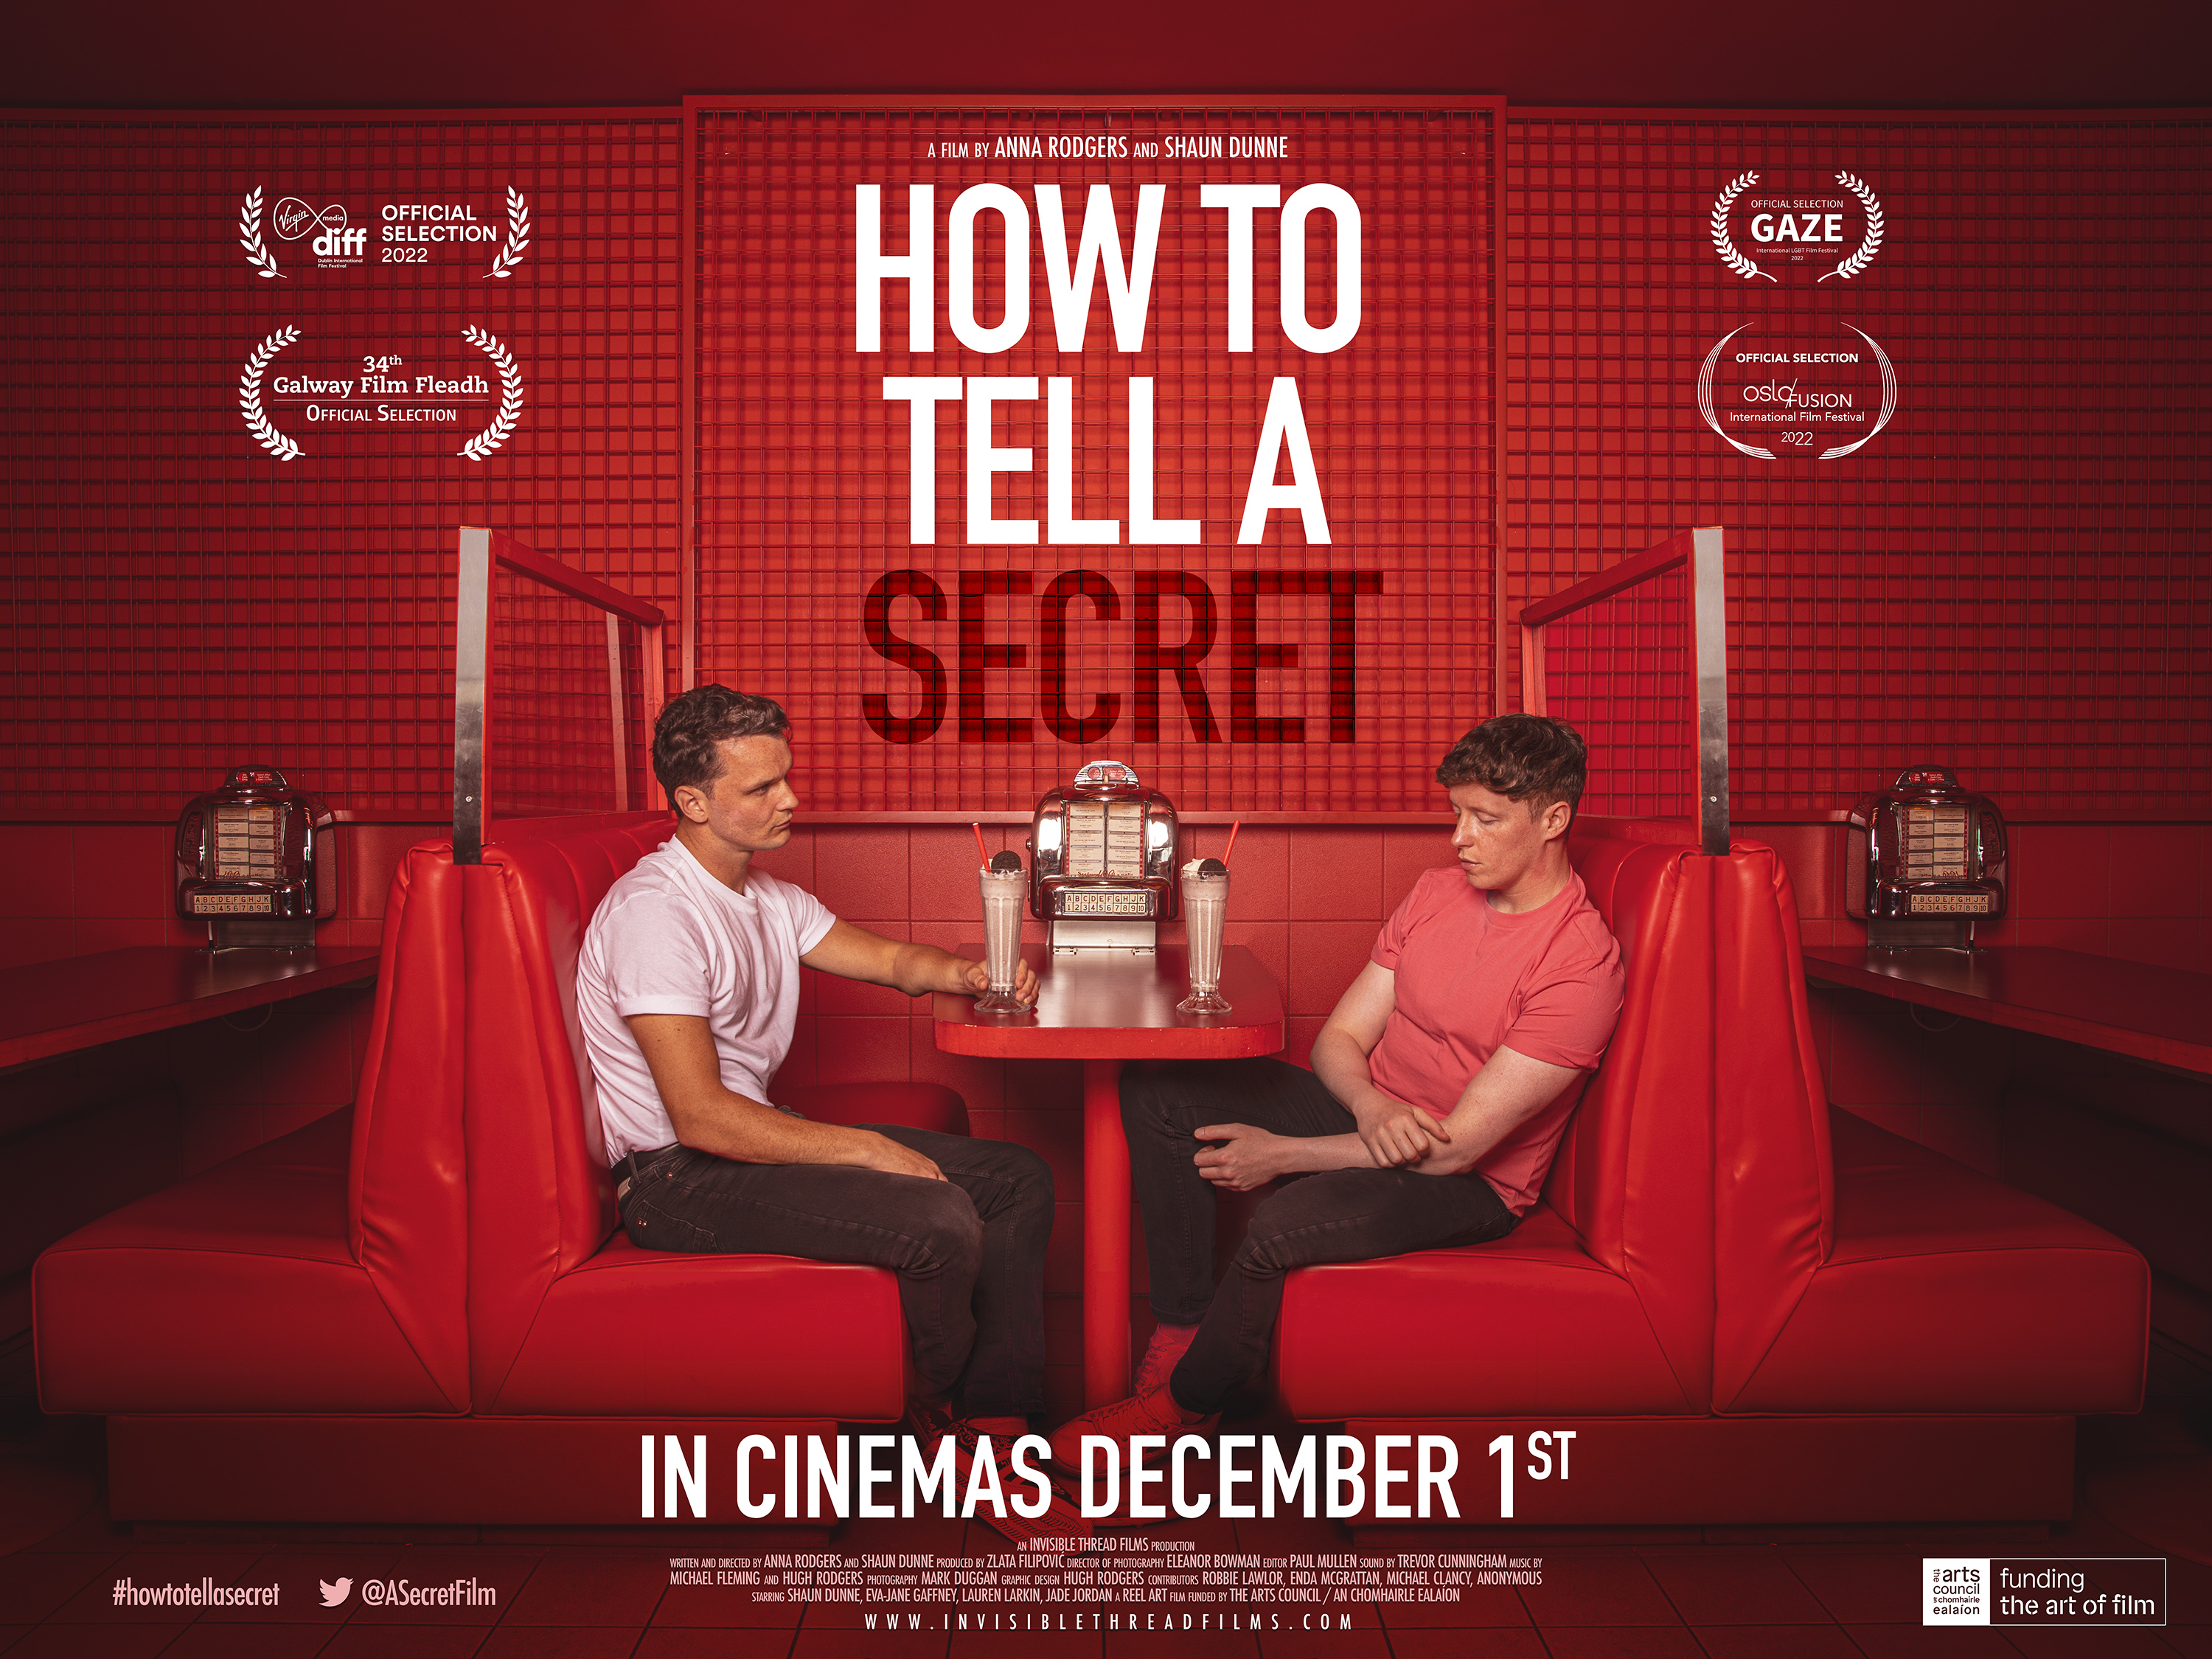 How to tell a secret film poster. image of two young men in a diner facing each other from opposite sides of a table, as though they are on a date. they each have a large milkshake in front of them. the man on the right stares intently at the man on the left, as the man on the left looks away, forlorn and distracted. large white text above them reads the film's title 